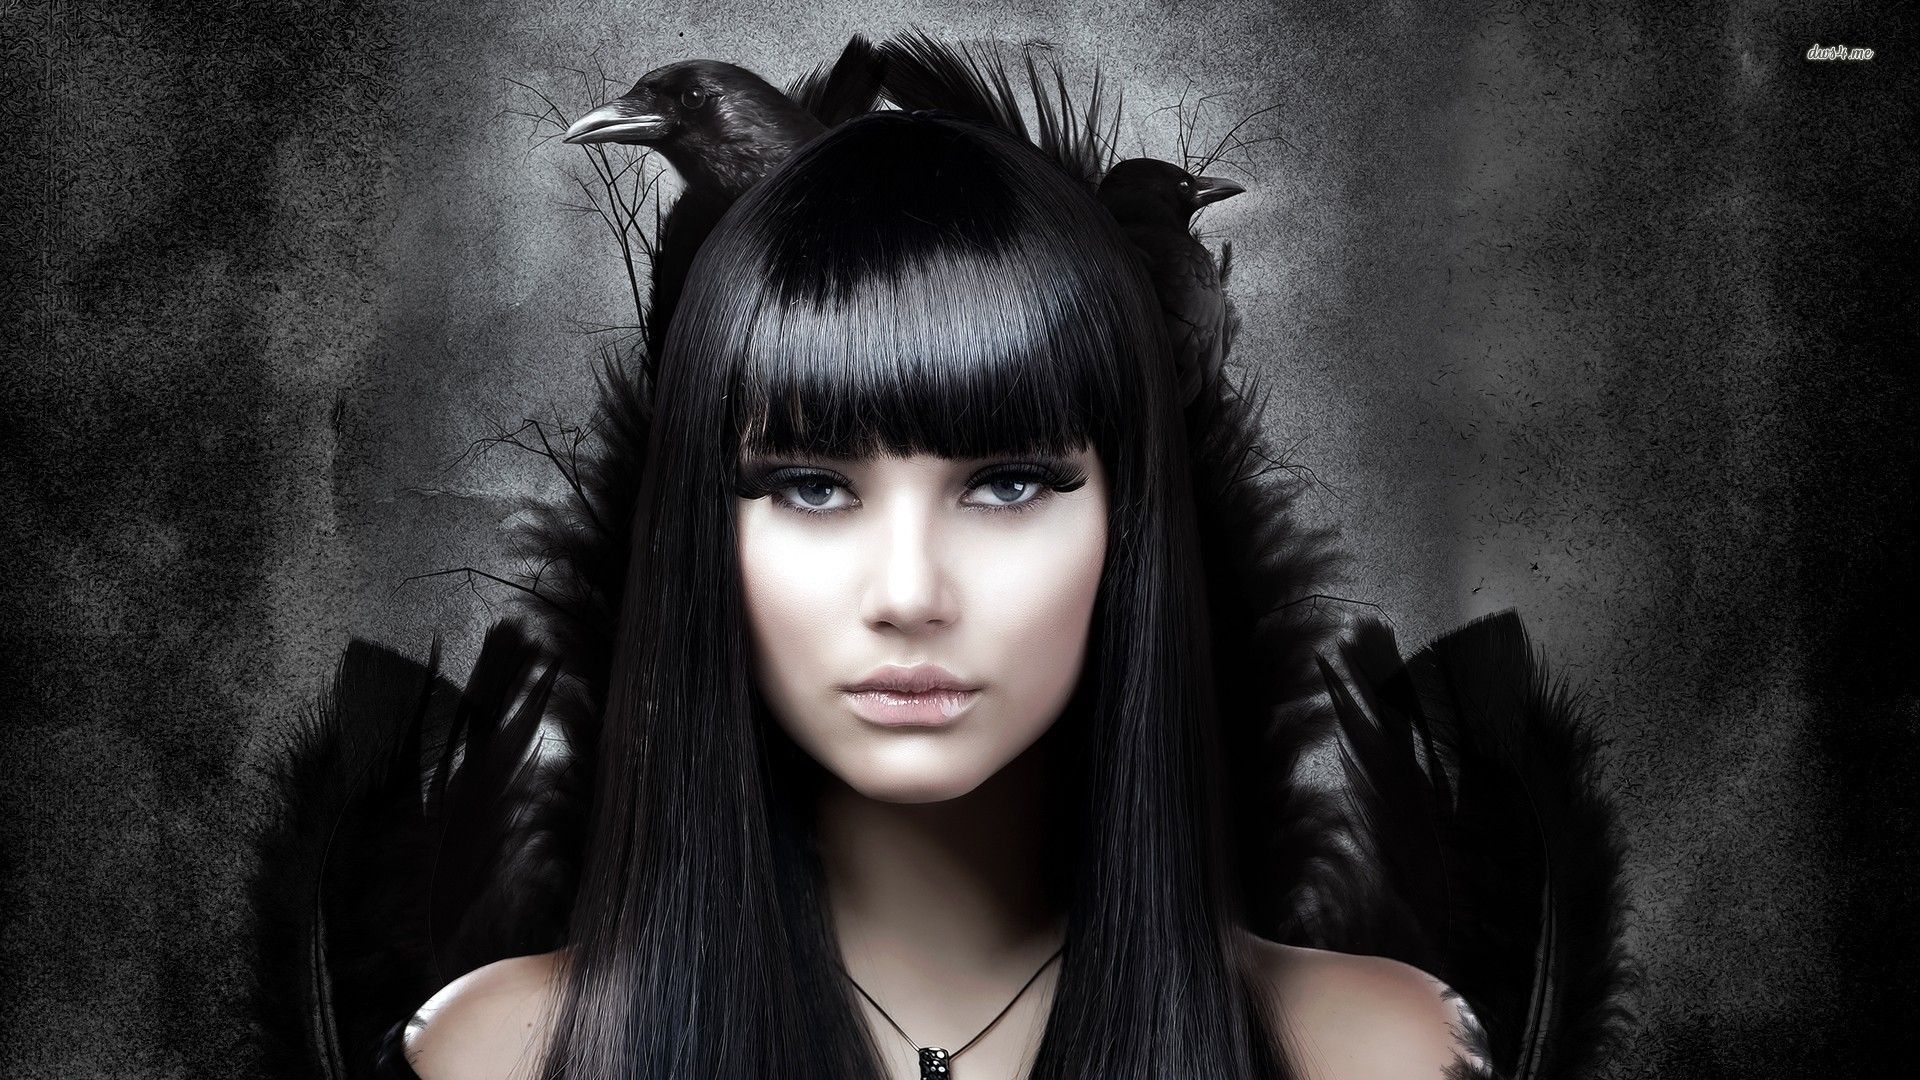 Goth girl with her raven HD wallpaper. Gothic hairstyles, Gothic